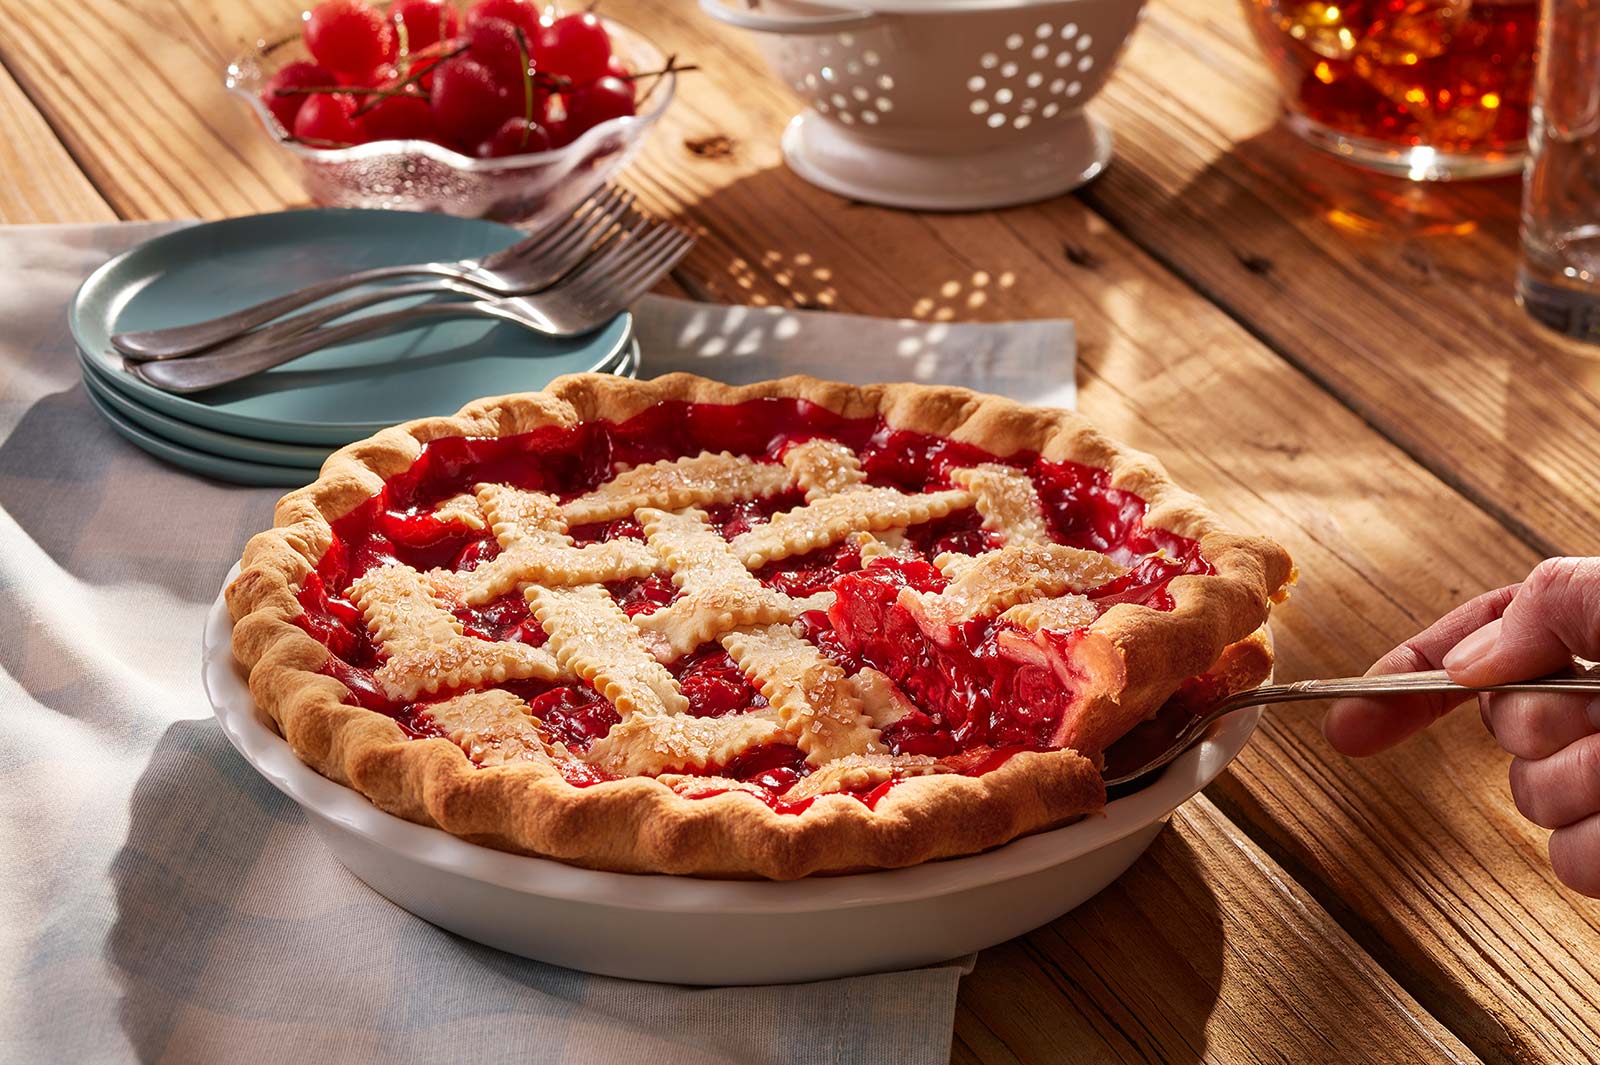 🍰 Only a Baked Good Connoisseur Will Have Eaten at Least 20/39 of These Foods Cherry pie